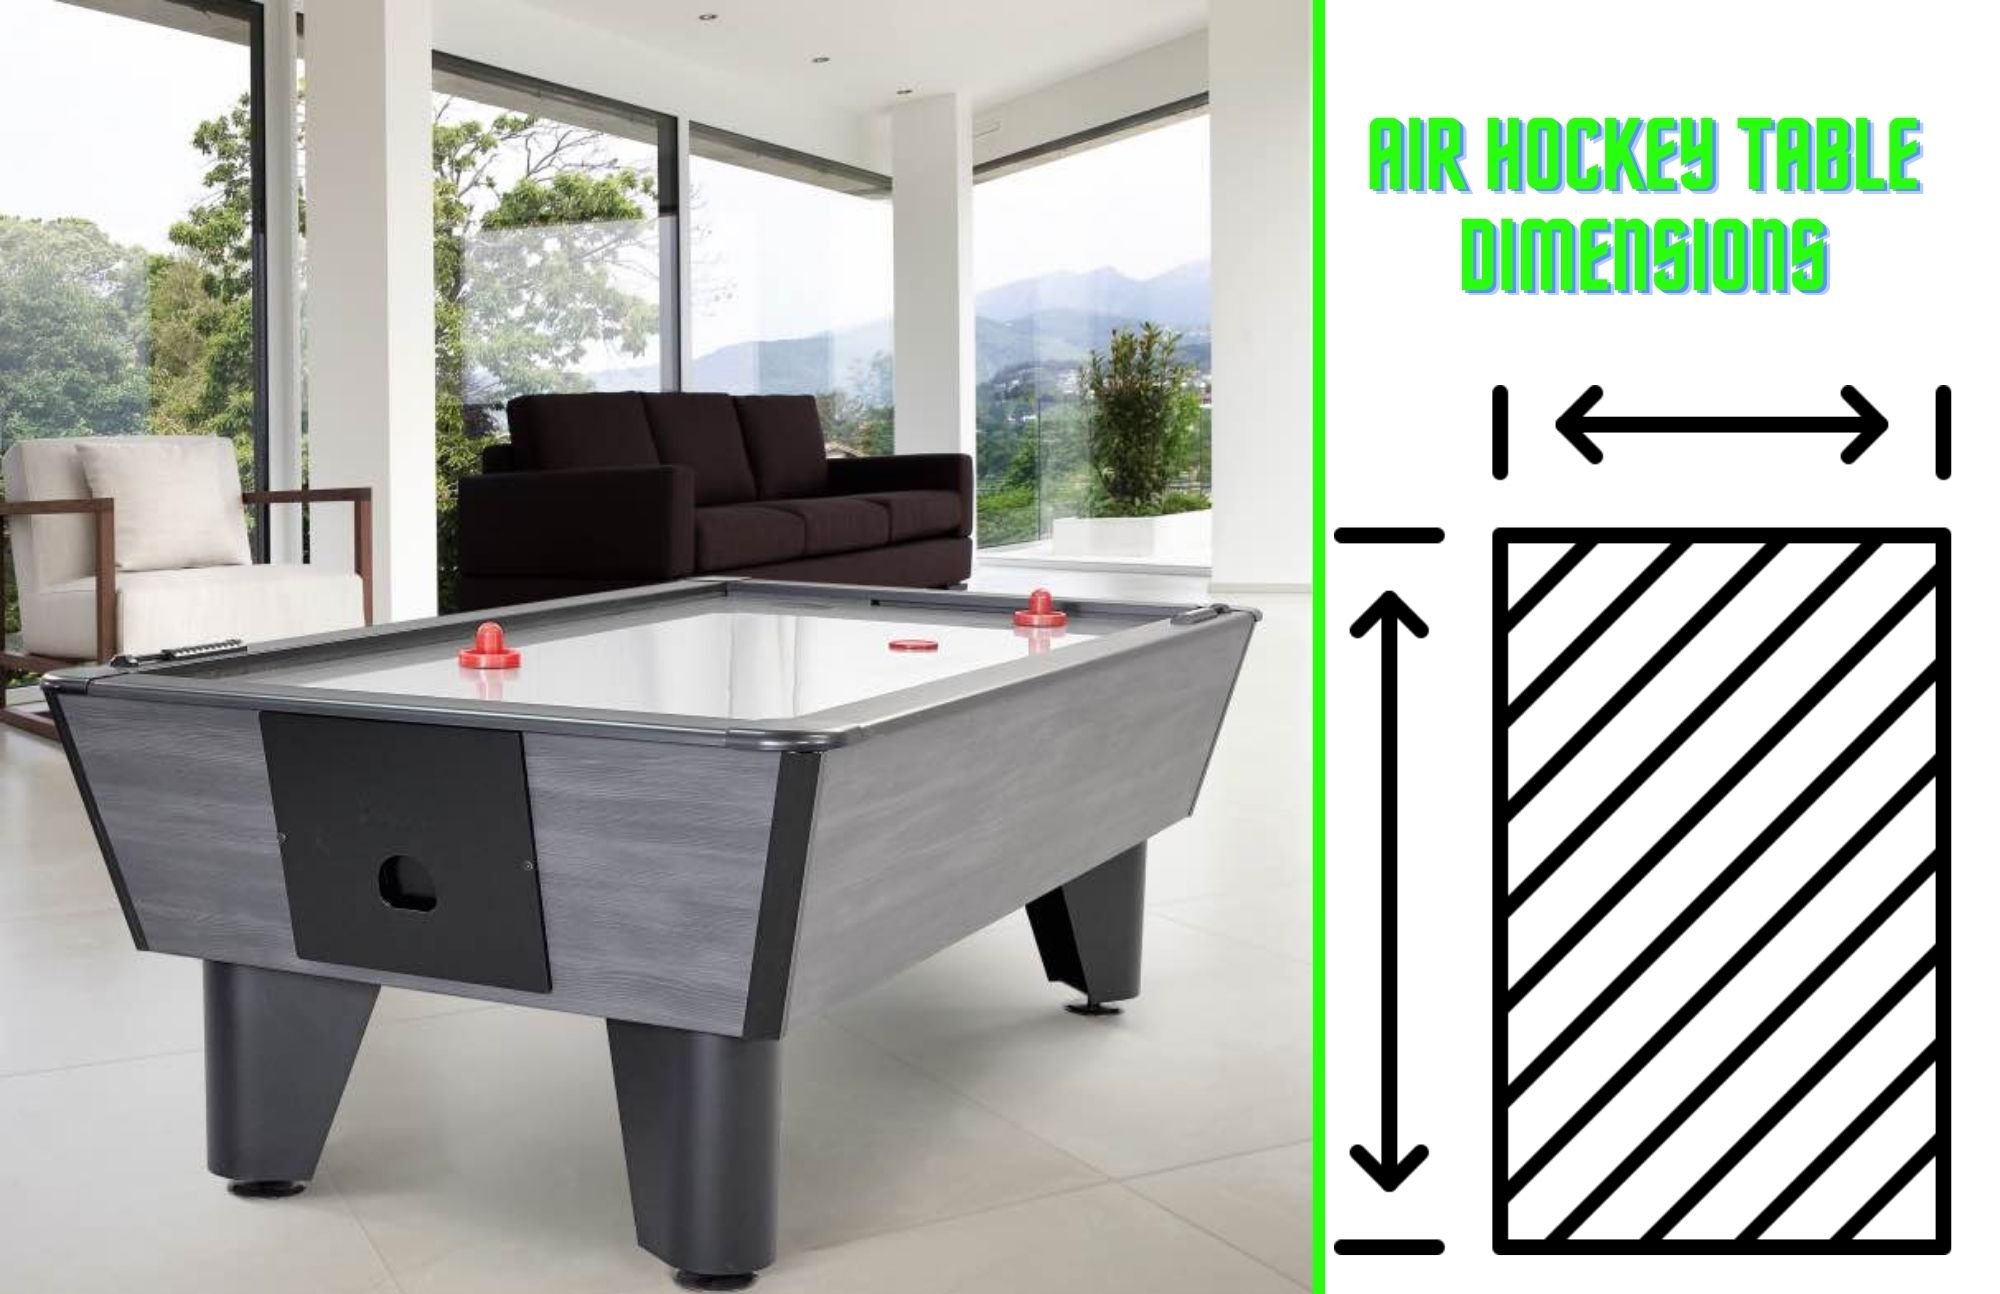 Air Hockey Tables' Dimensions - Best Air Hockey Table Sizes For You